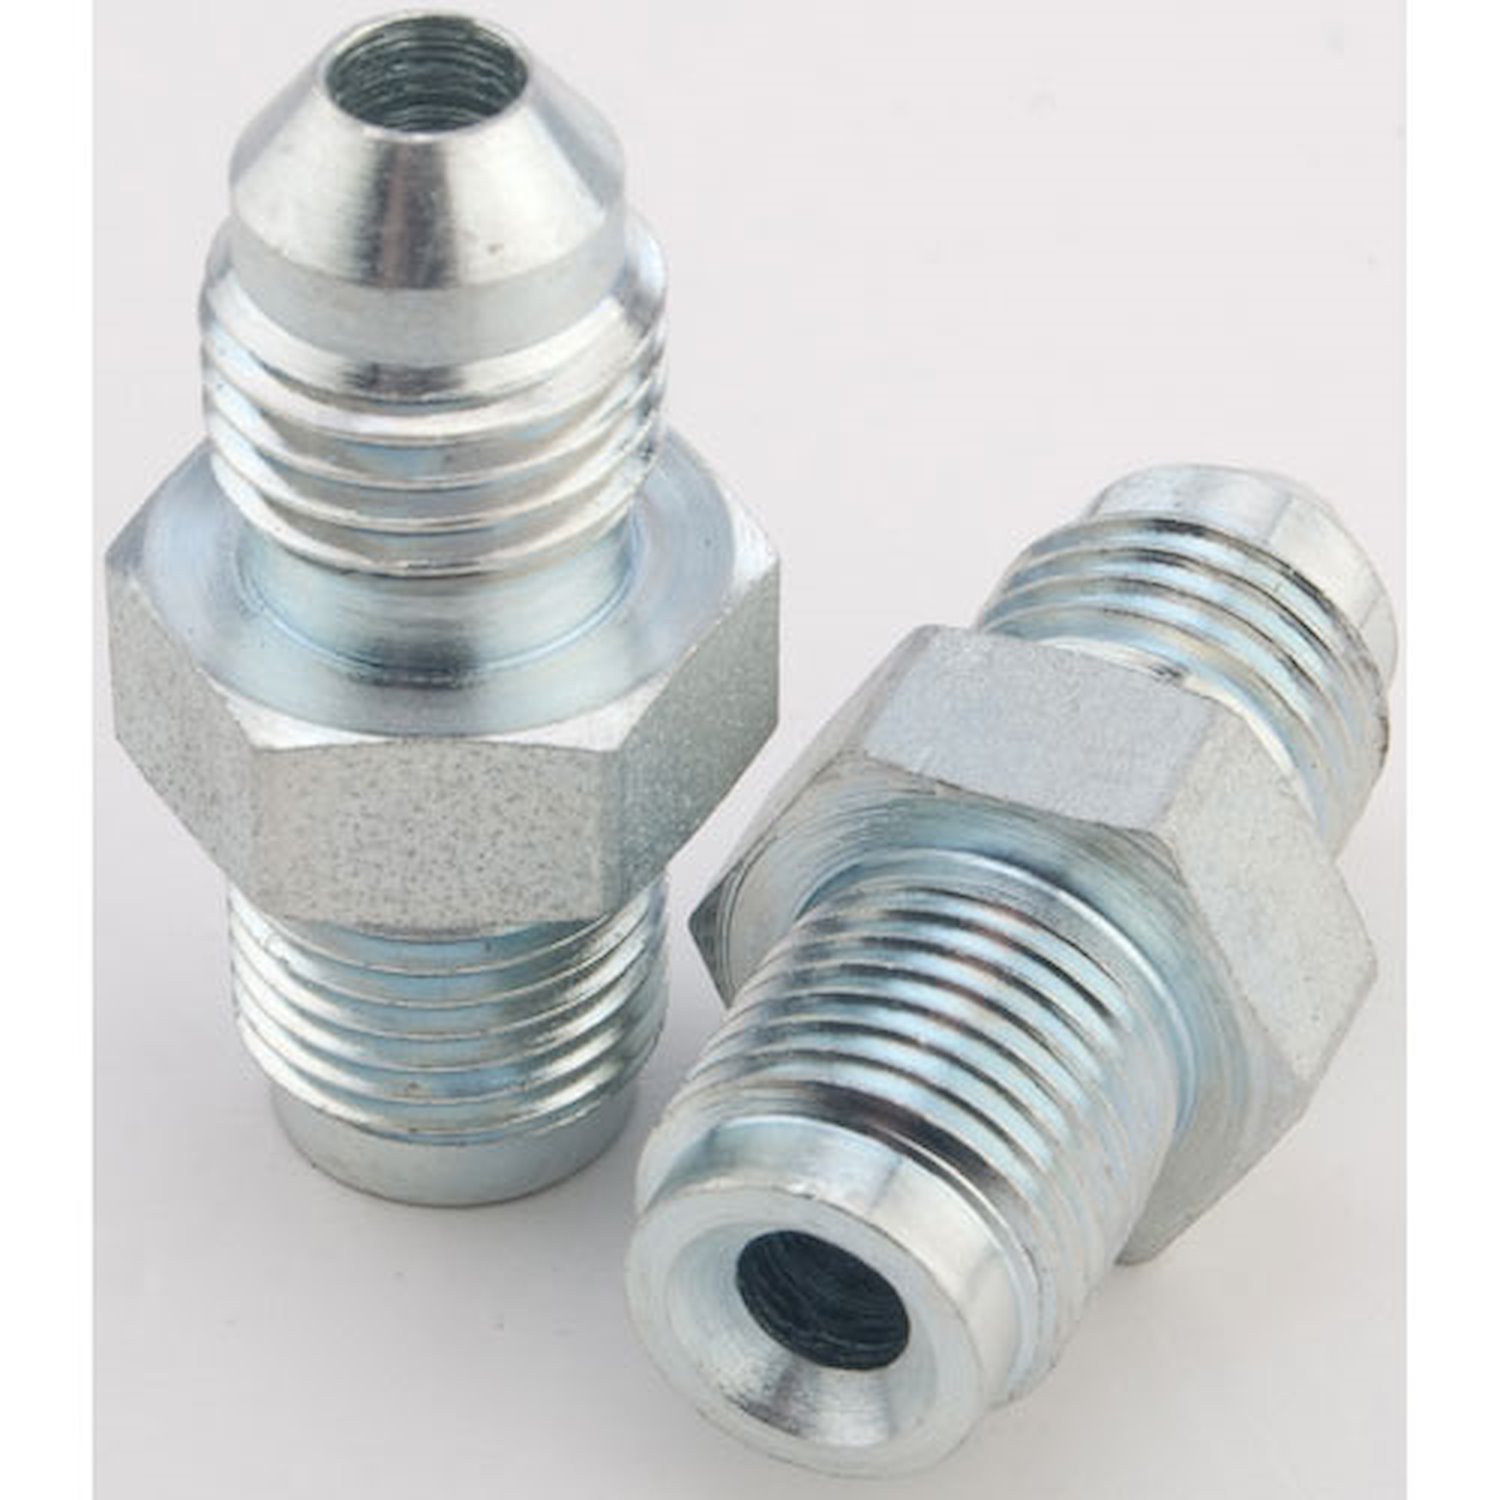 AN to Inverted Flare Male Brake Adapter Fittings [-4 AN x 7/16 in.-24 Male Inverted Flare]